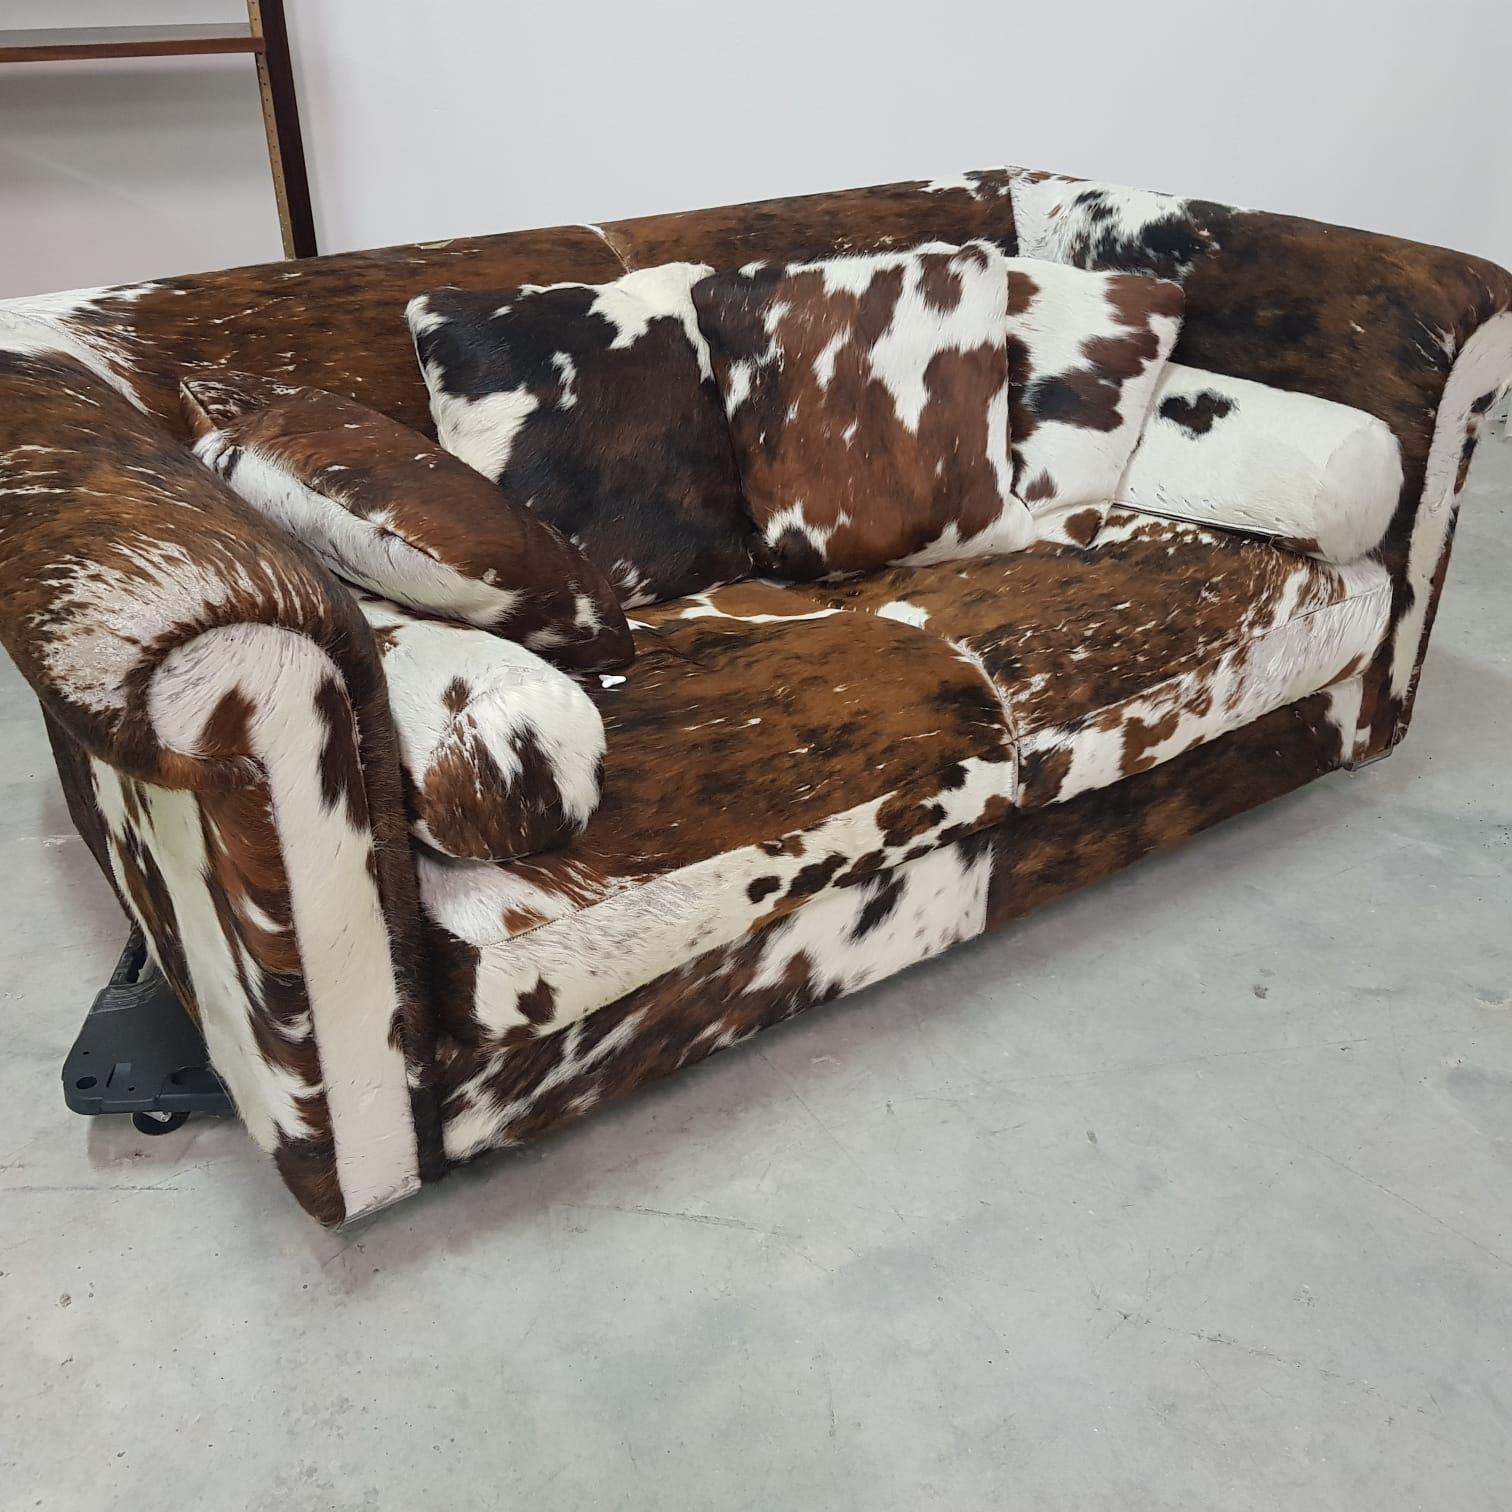 Baxter Brown and Dappled pony skin Leather Sofa with Pillows, Italy, 1990s For Sale 9